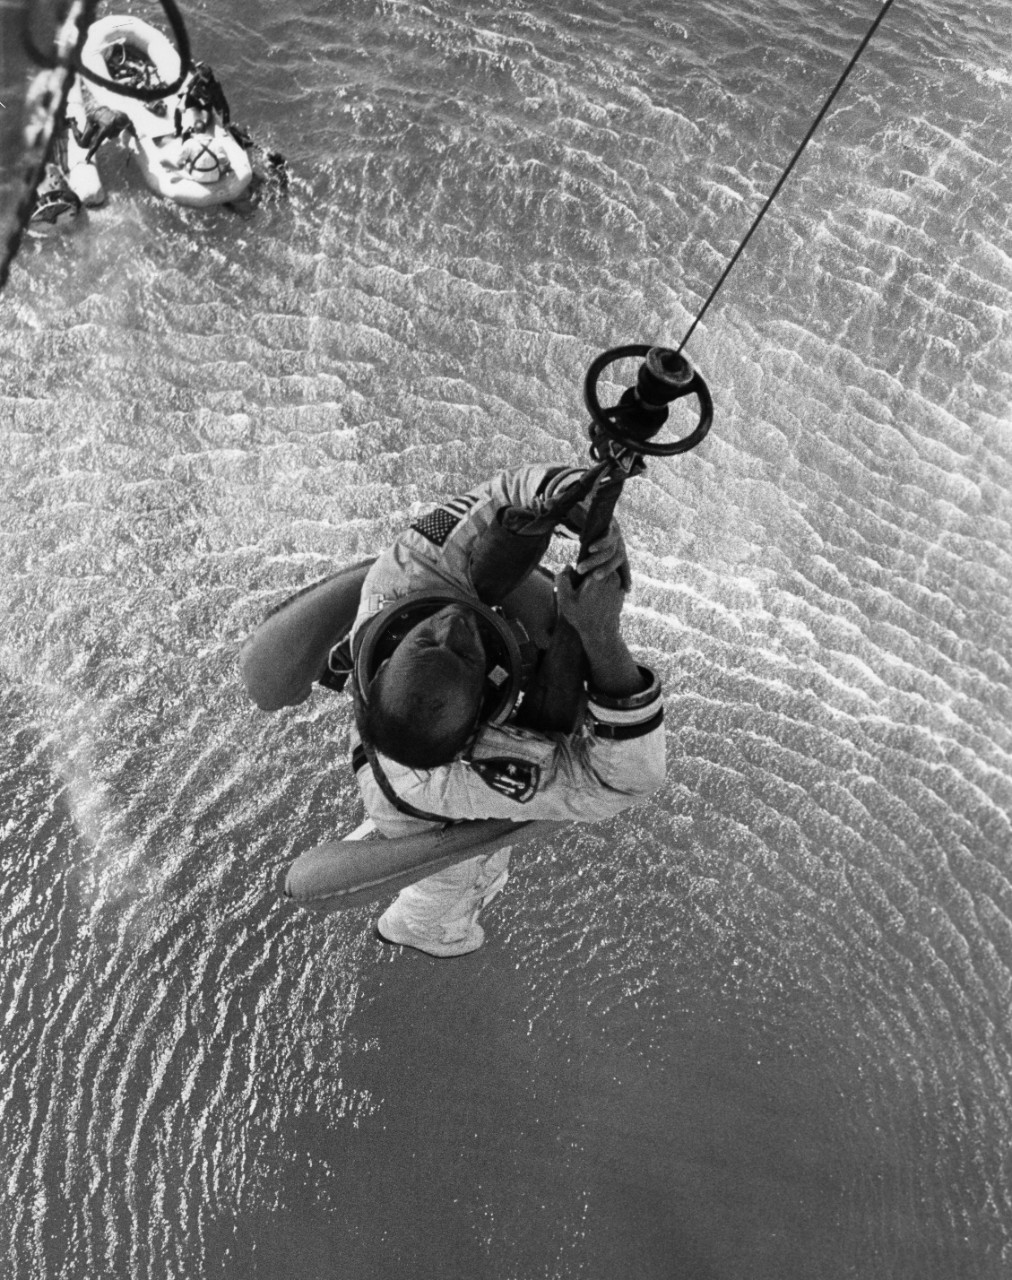 Gemini 11 astronaut Charles Conrad is hoisted aboard a recovery helicopter, with astronaut Richard Gordon in the raft below.